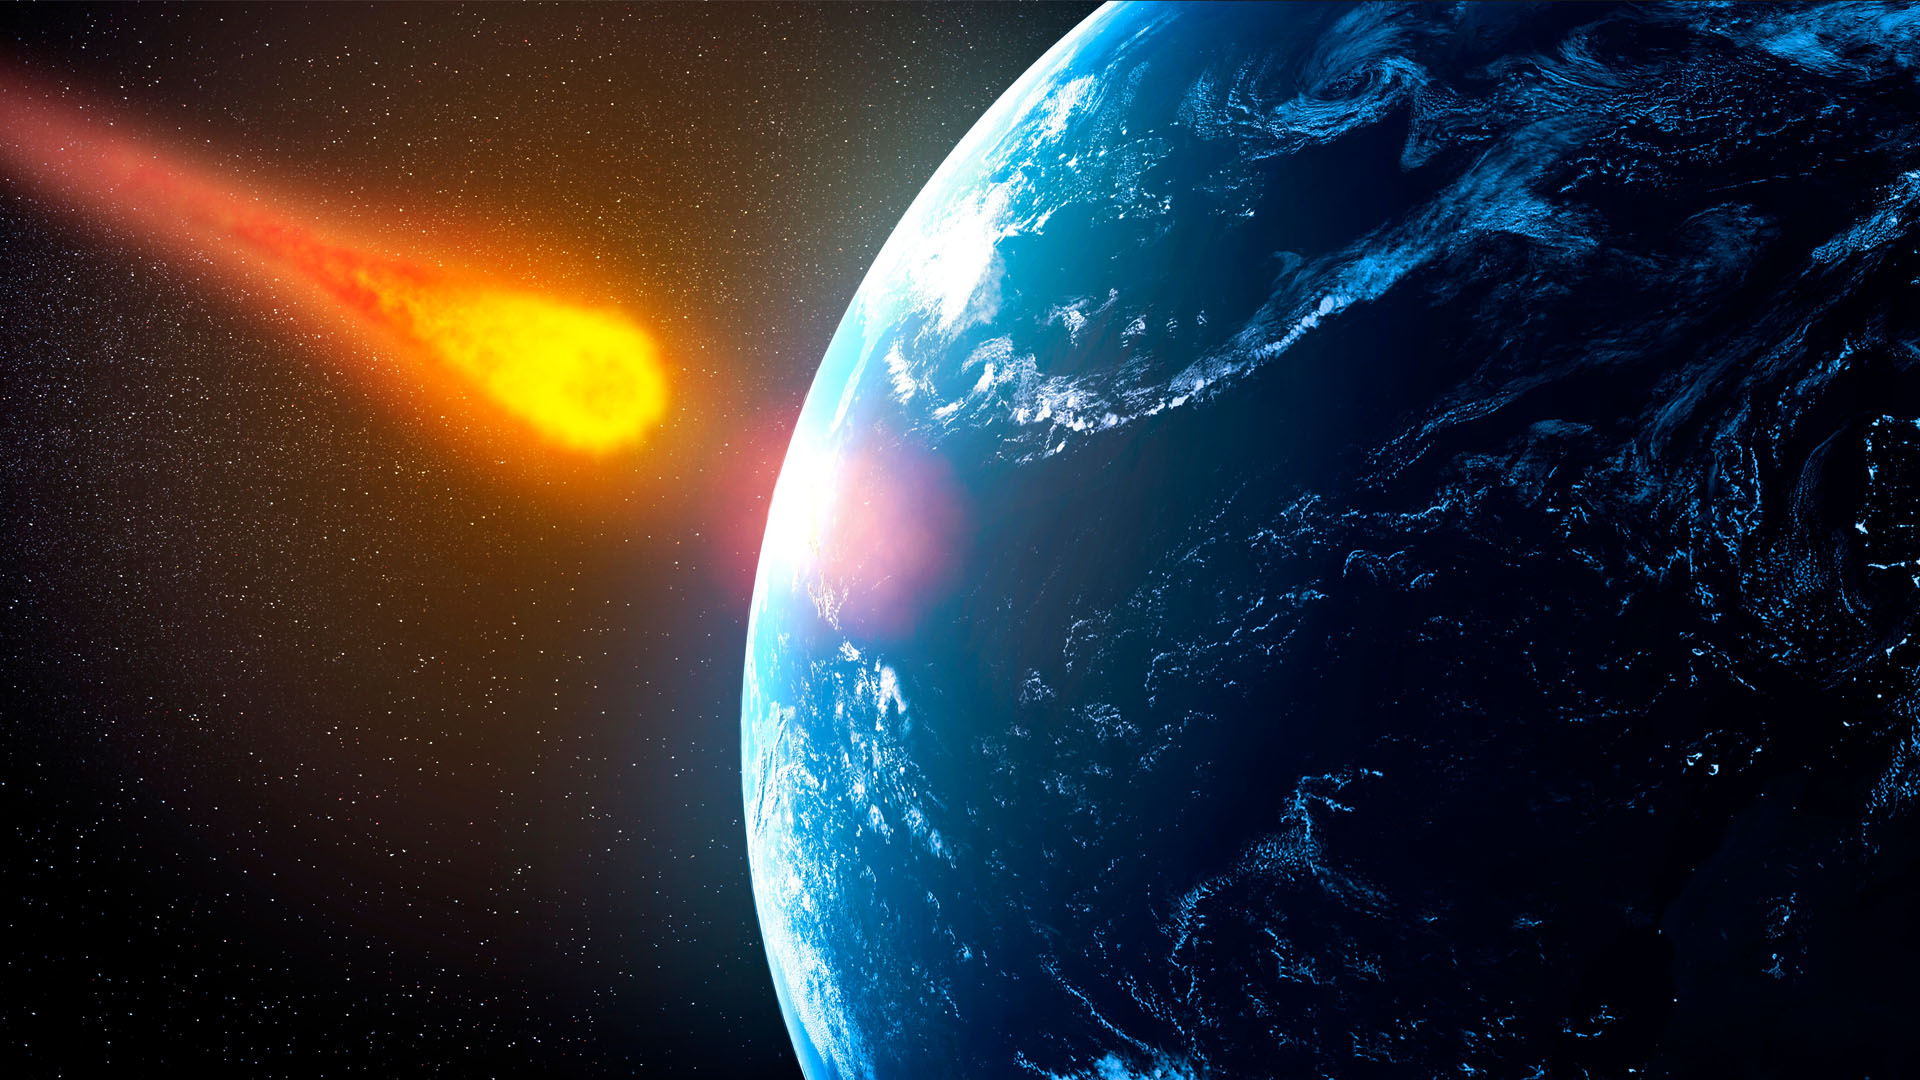 Could Earth really be destroyed by an asteroid? An astronomer weighs in